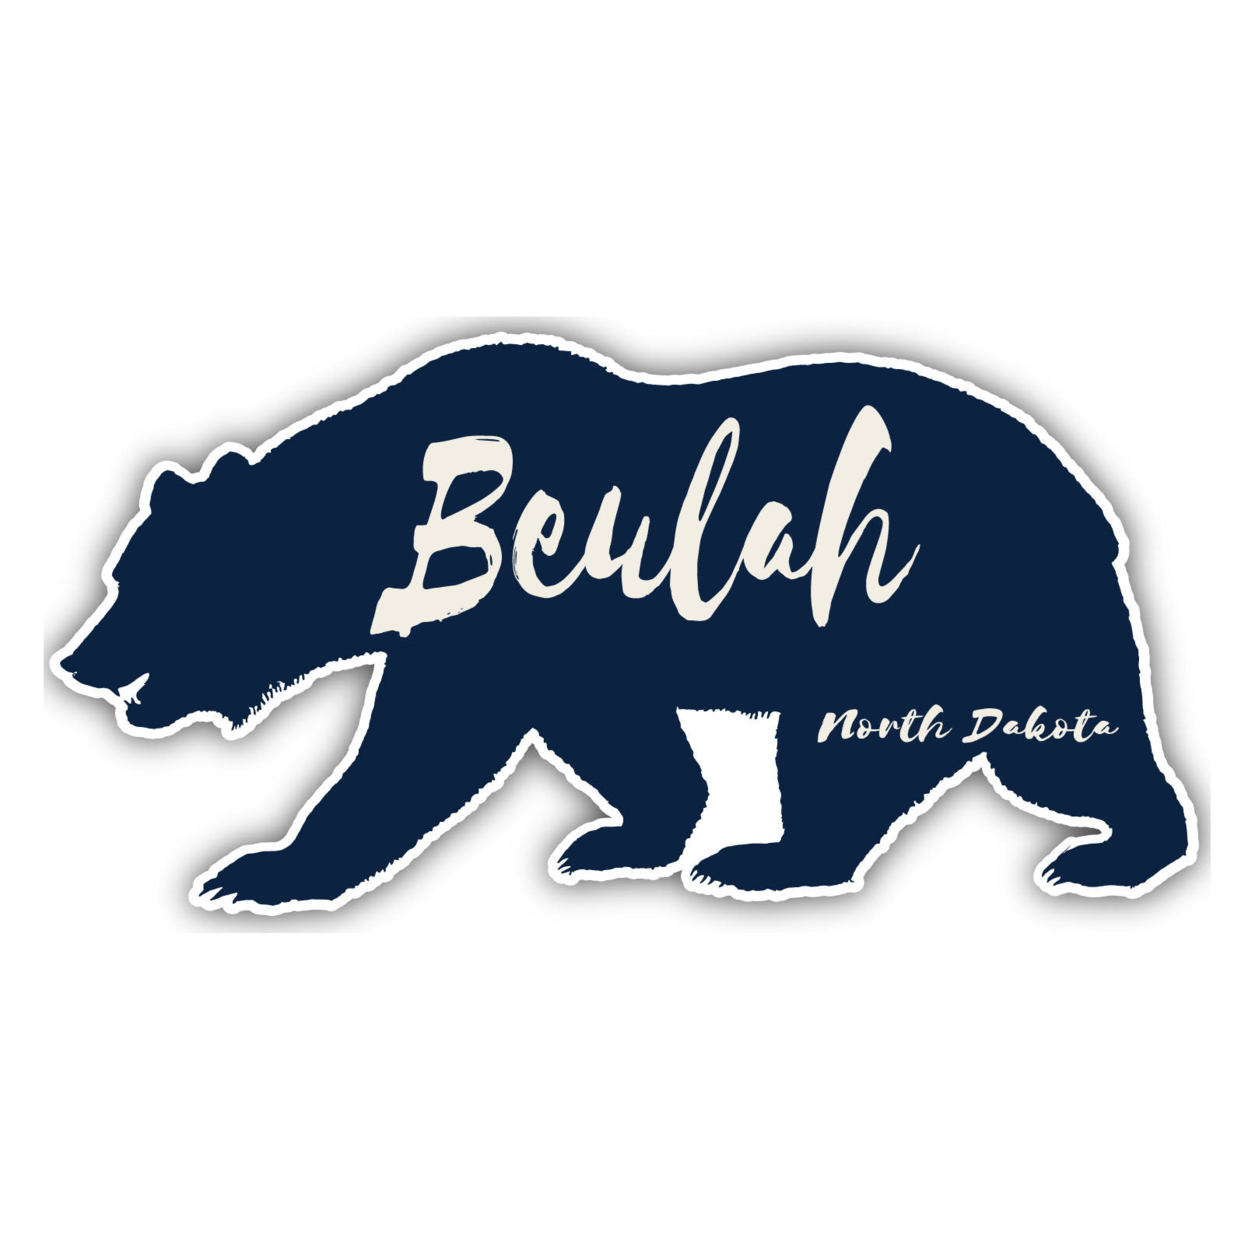 Beulah North Dakota Souvenir Decorative Stickers (Choose Theme And Size) - 4-Pack, 12-Inch, Great Outdoors